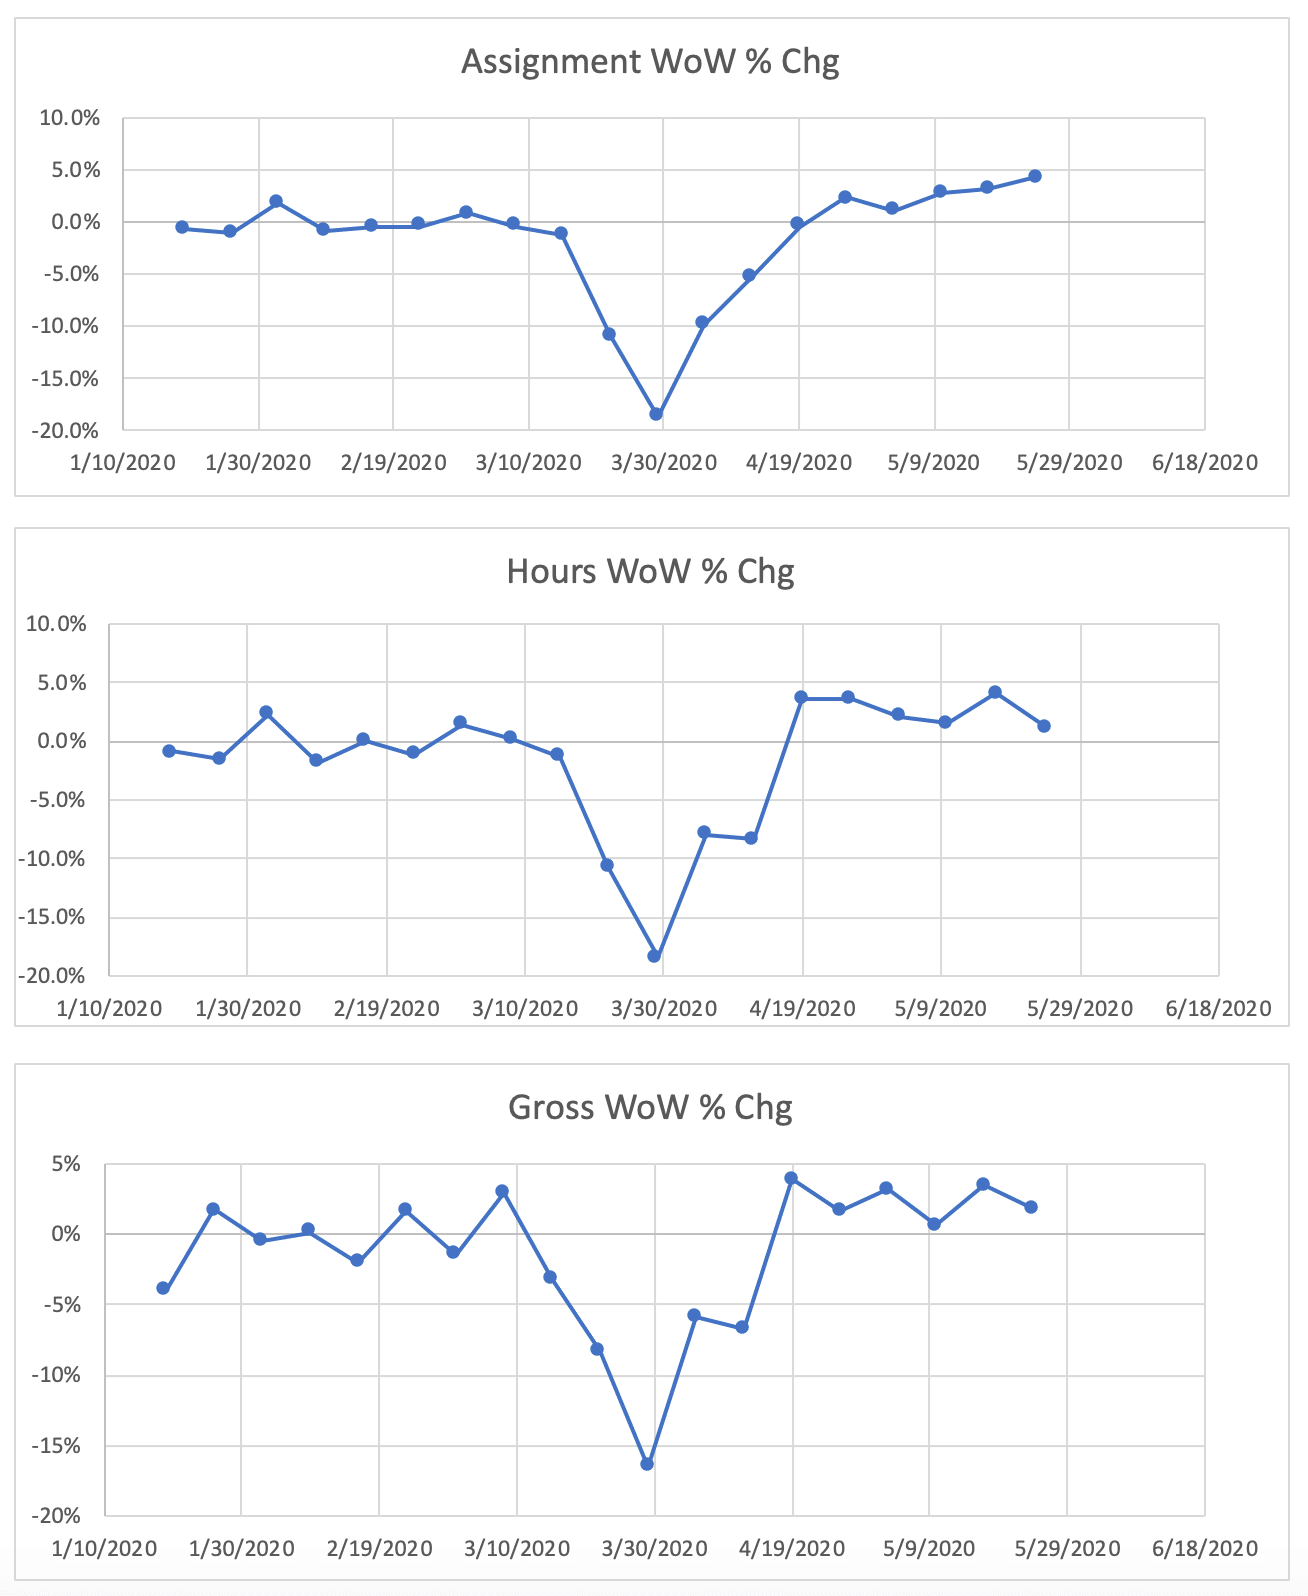 3 graphs that show week over week changes